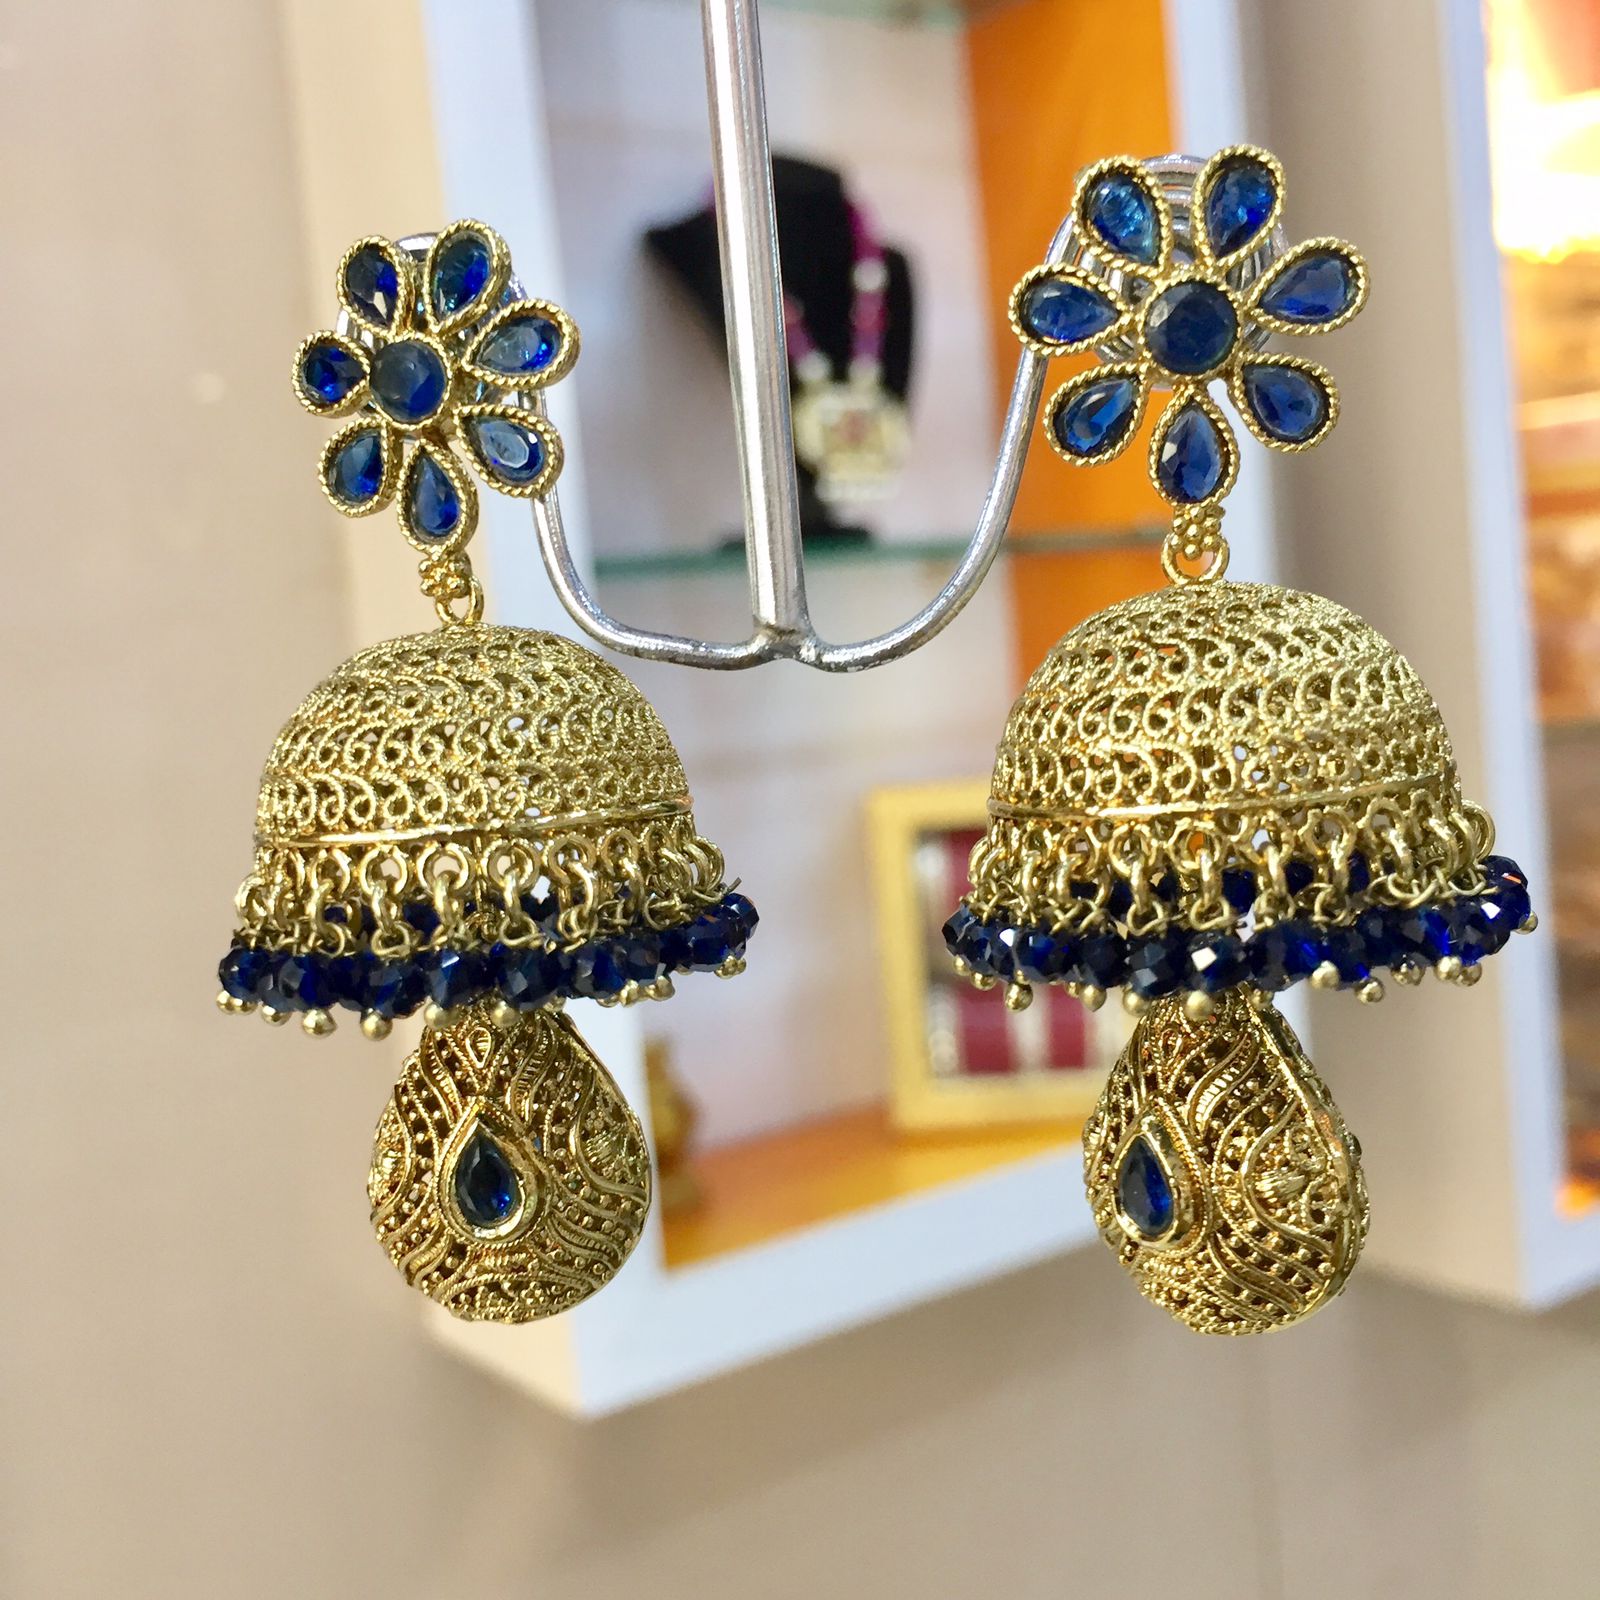 Buy Temple Jewellery Light Weight Temple Jhumkas Online Shopping